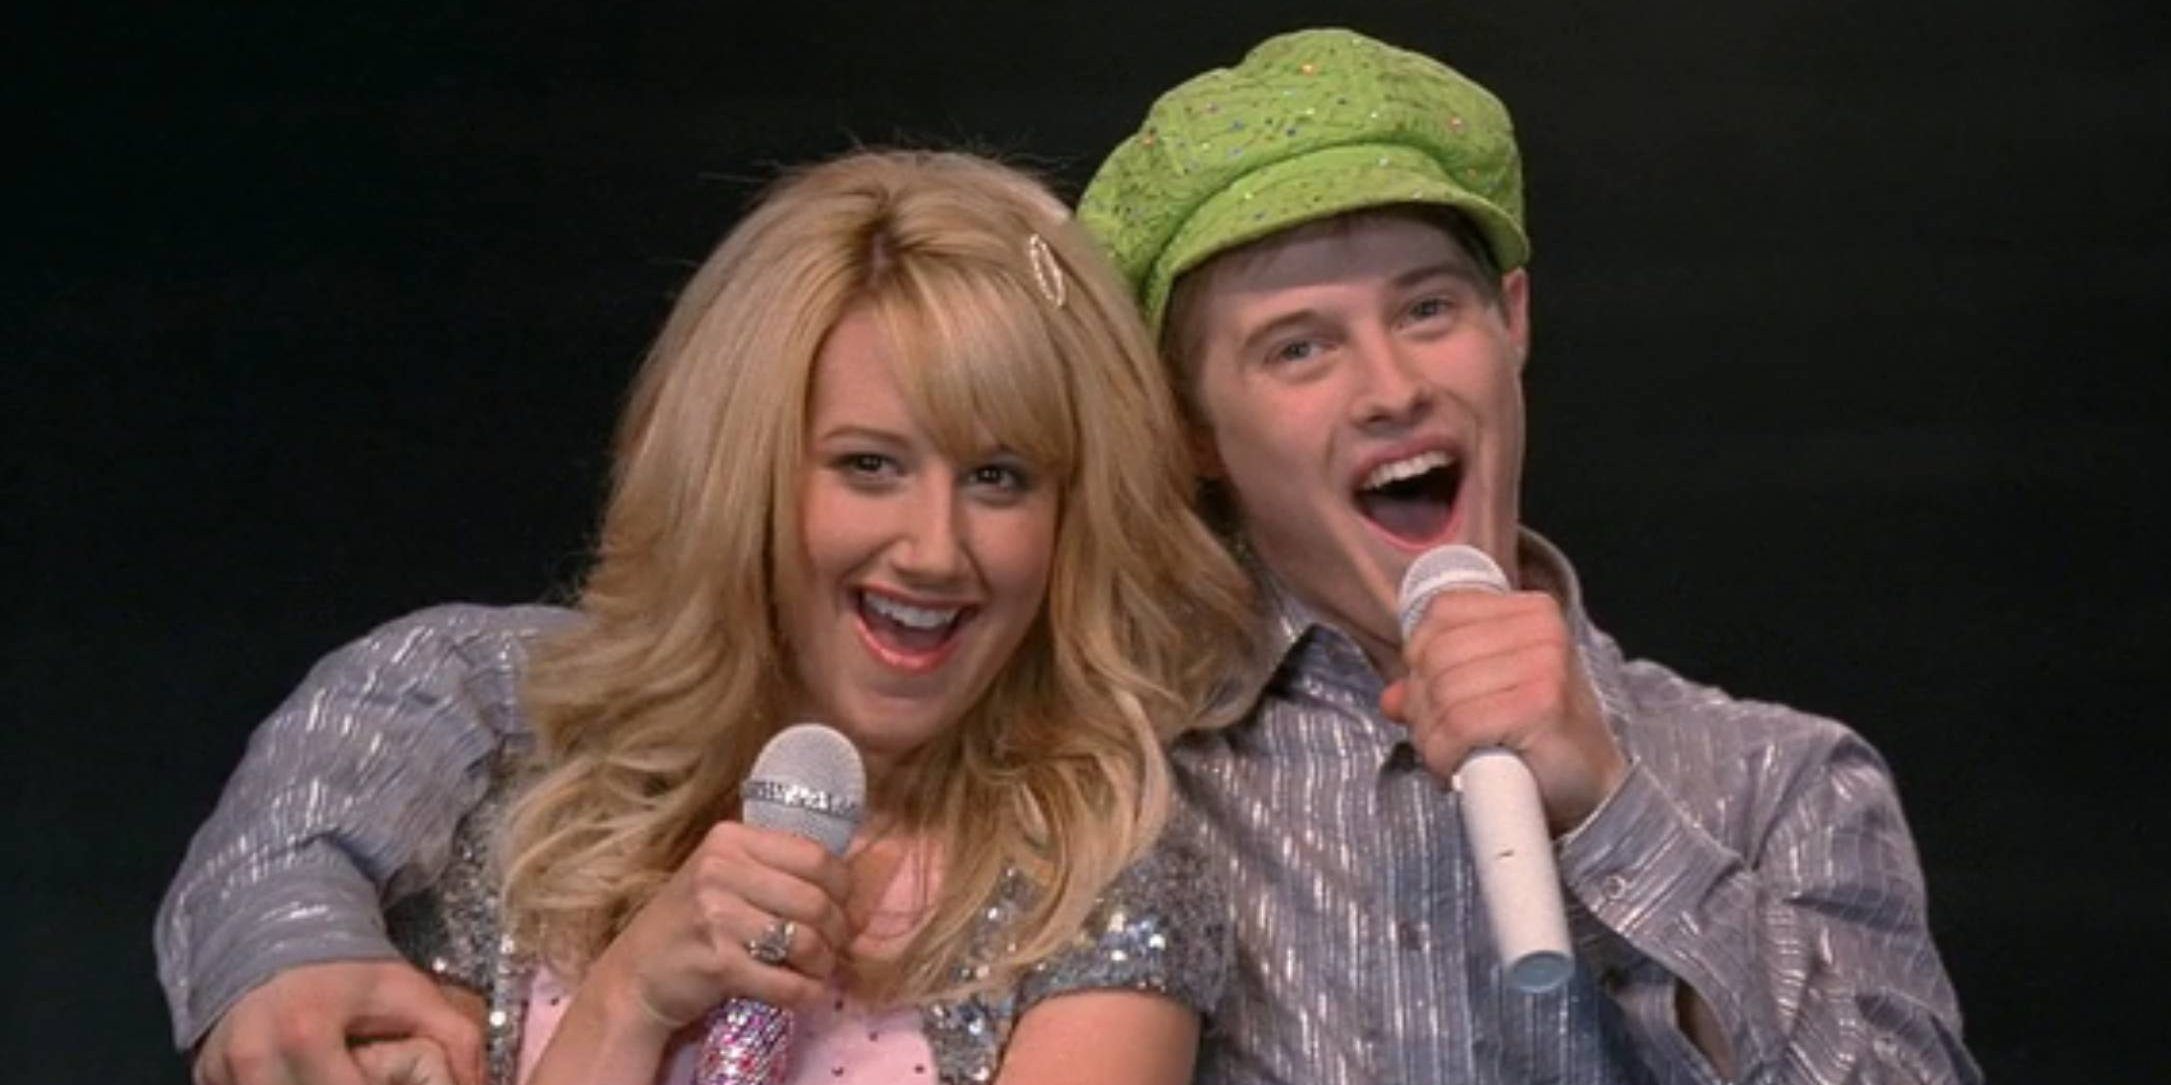 Sharpay and Ryan hold their microphones as they sing What I've Been Looking For in High School Musical